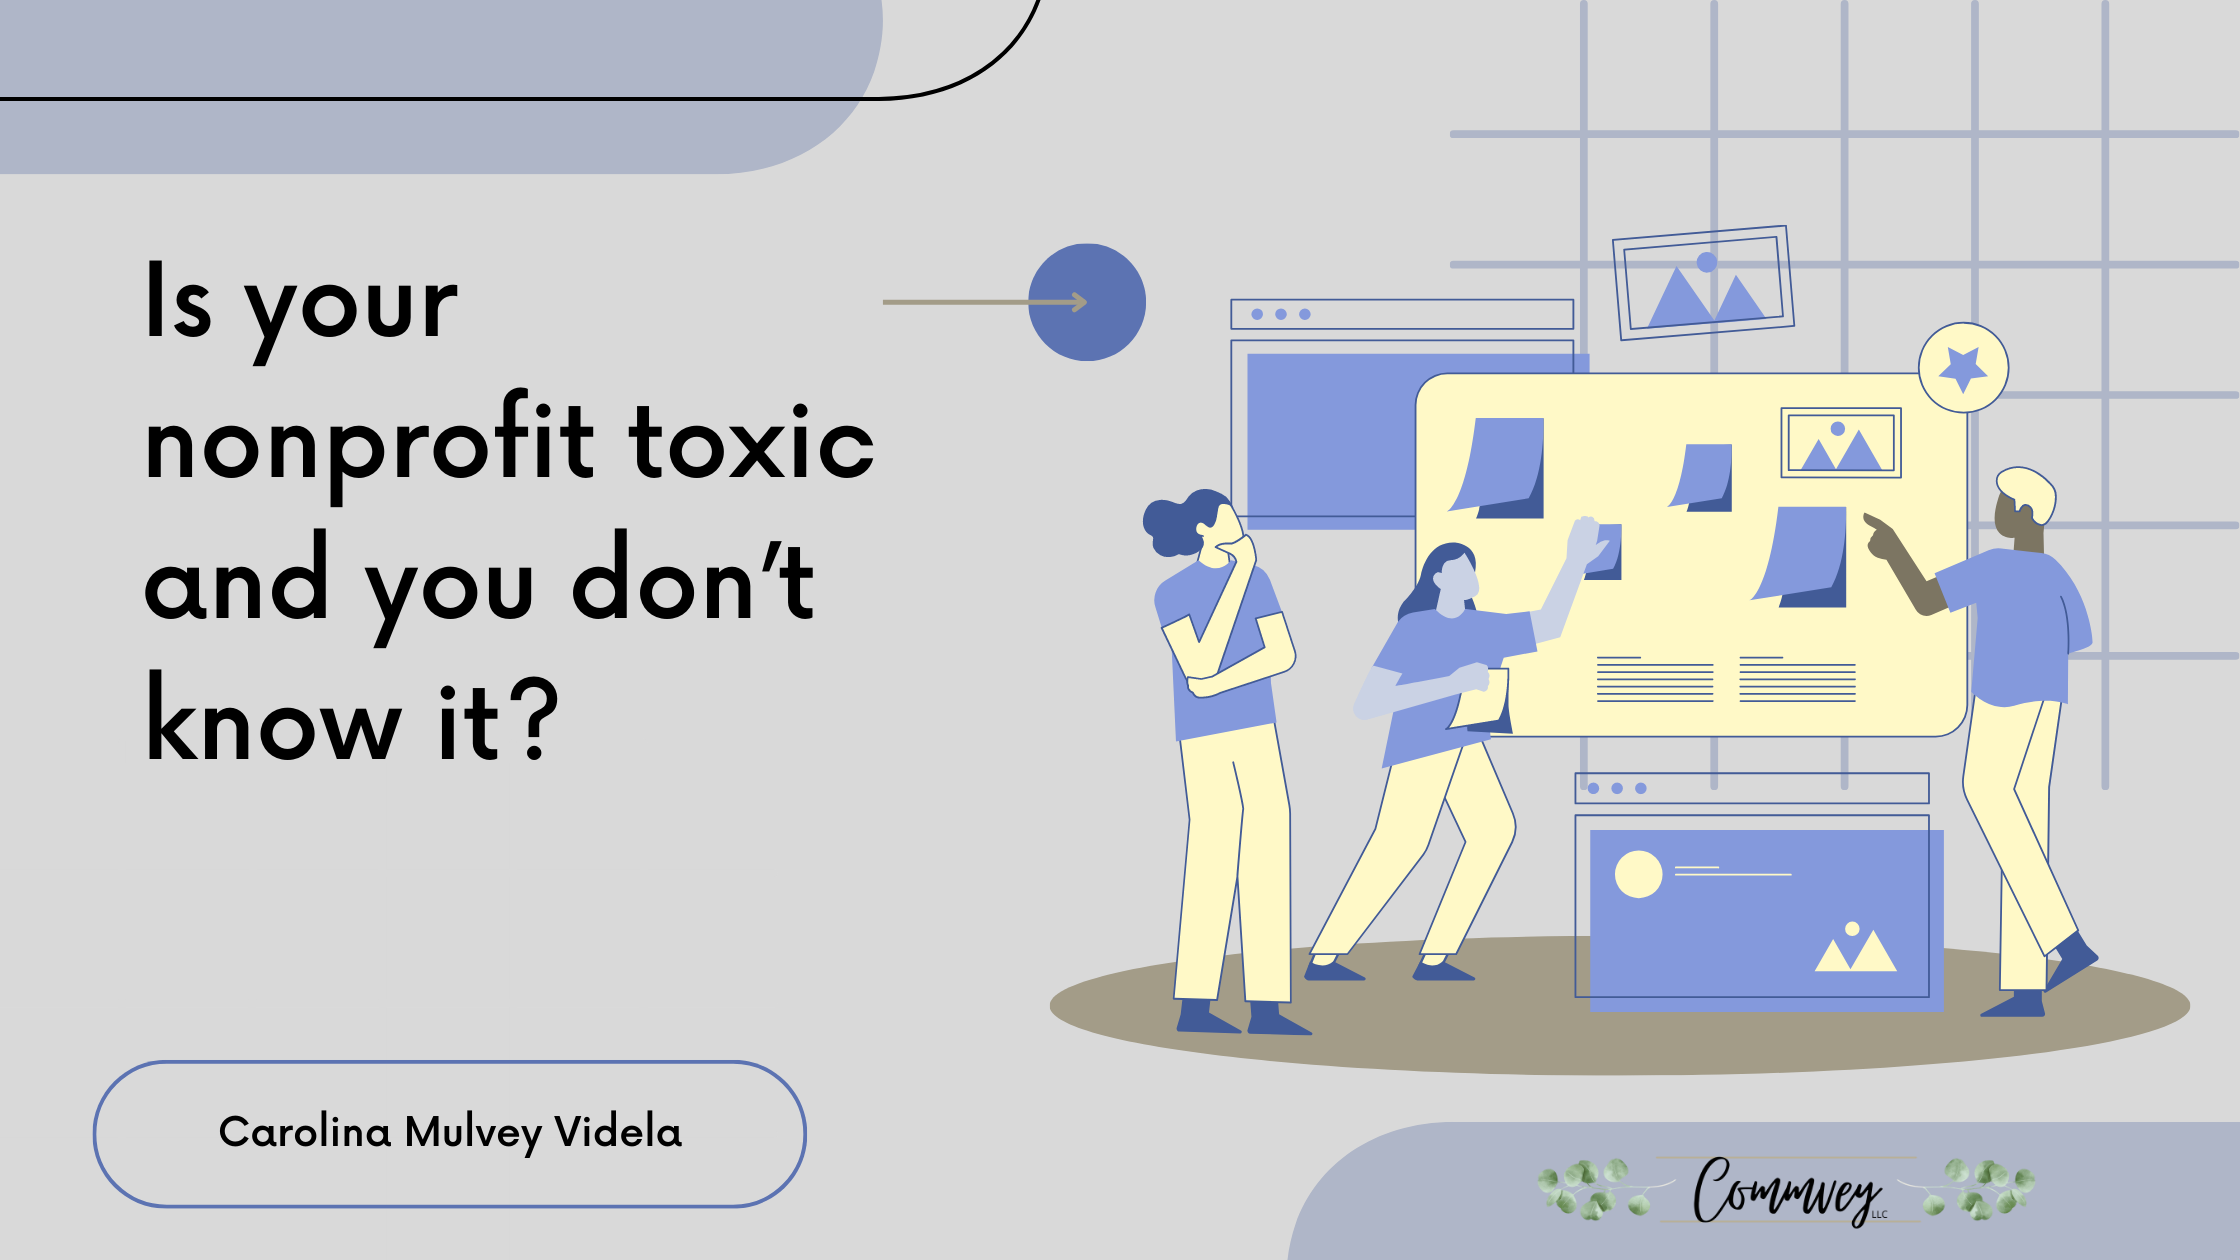 text is "Is Your Nonprofit Toxic and You Don't Know It?" with an illustration of three people working on a bulletin board